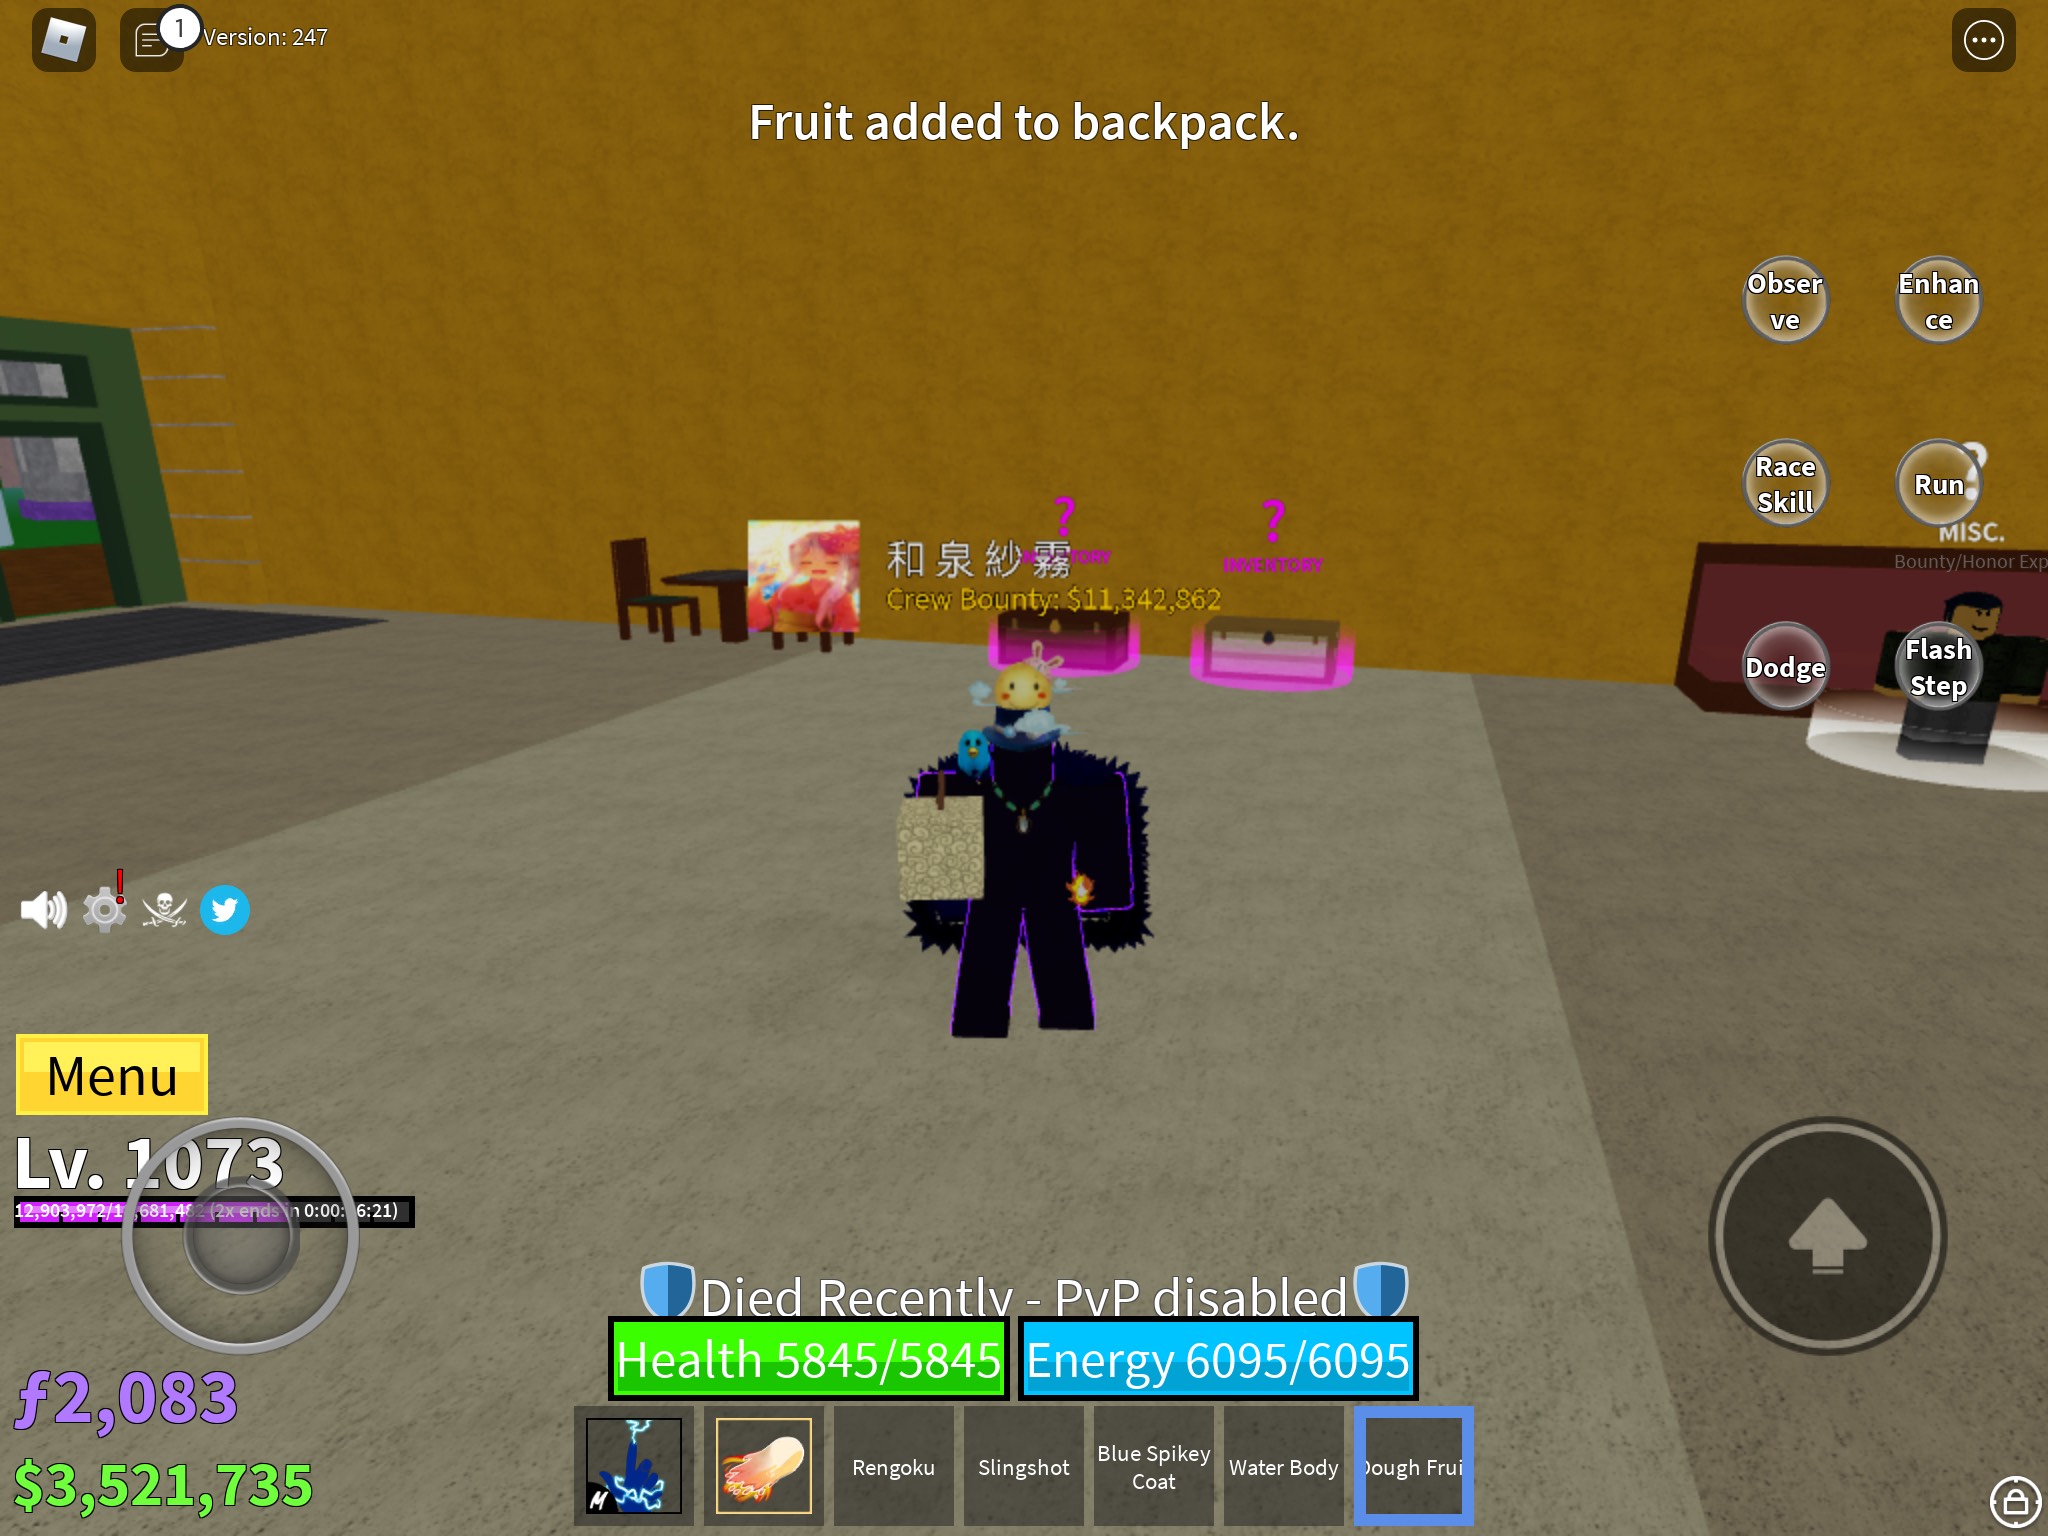 my dough fruit got randomly deleted from my inventory, is this